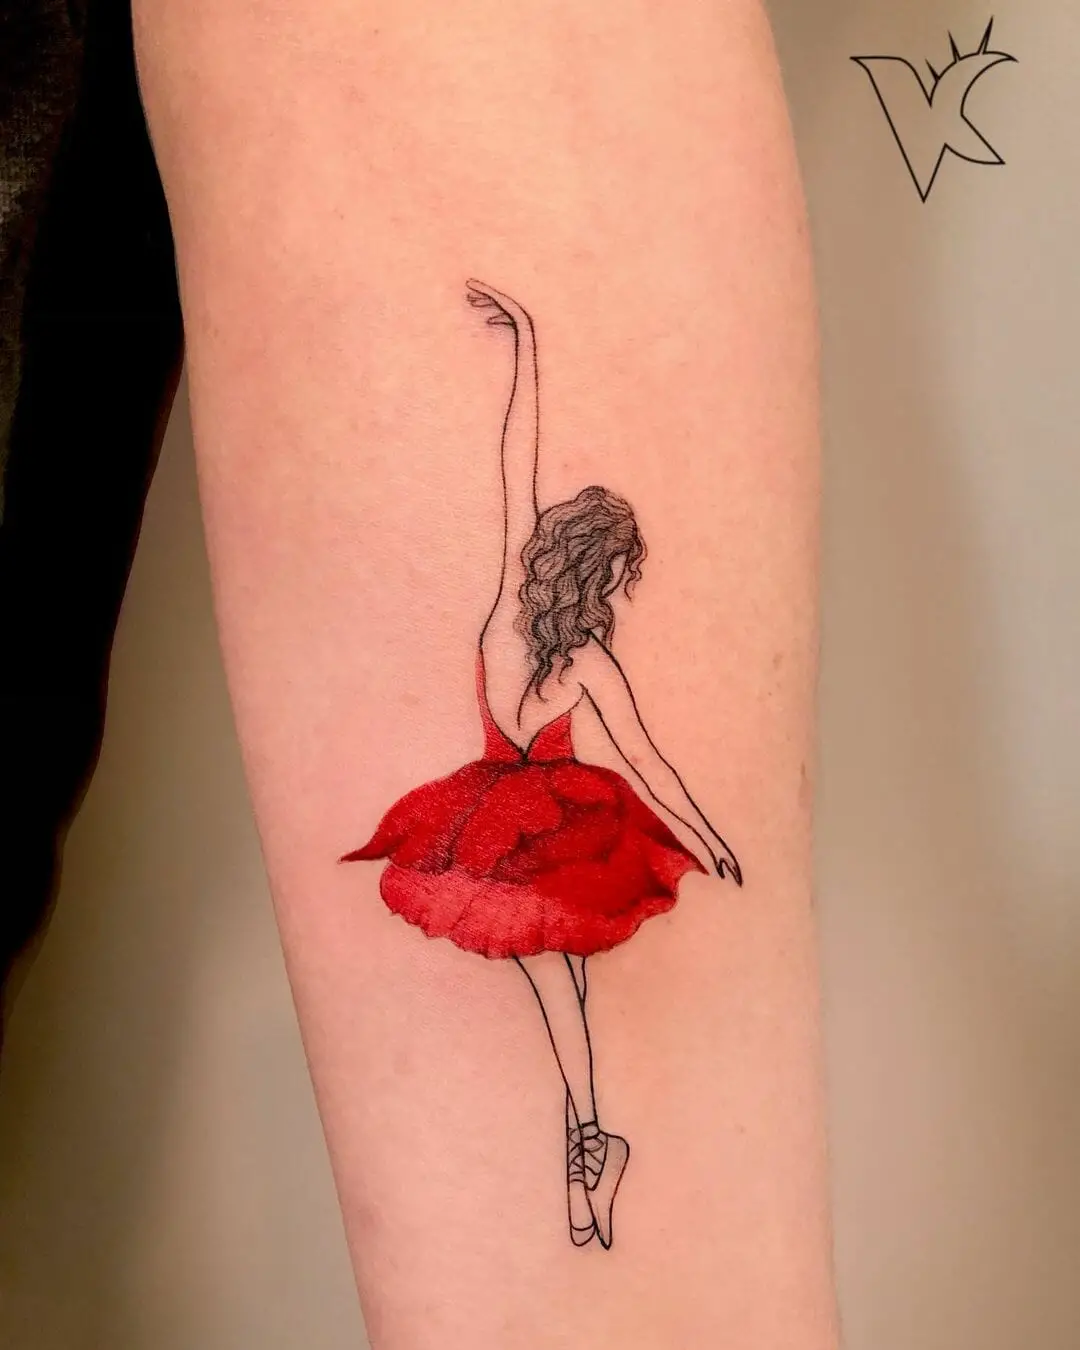 36 Amazing and Beautiful Dance Tattoo Ideas and Design Dancers Will Love